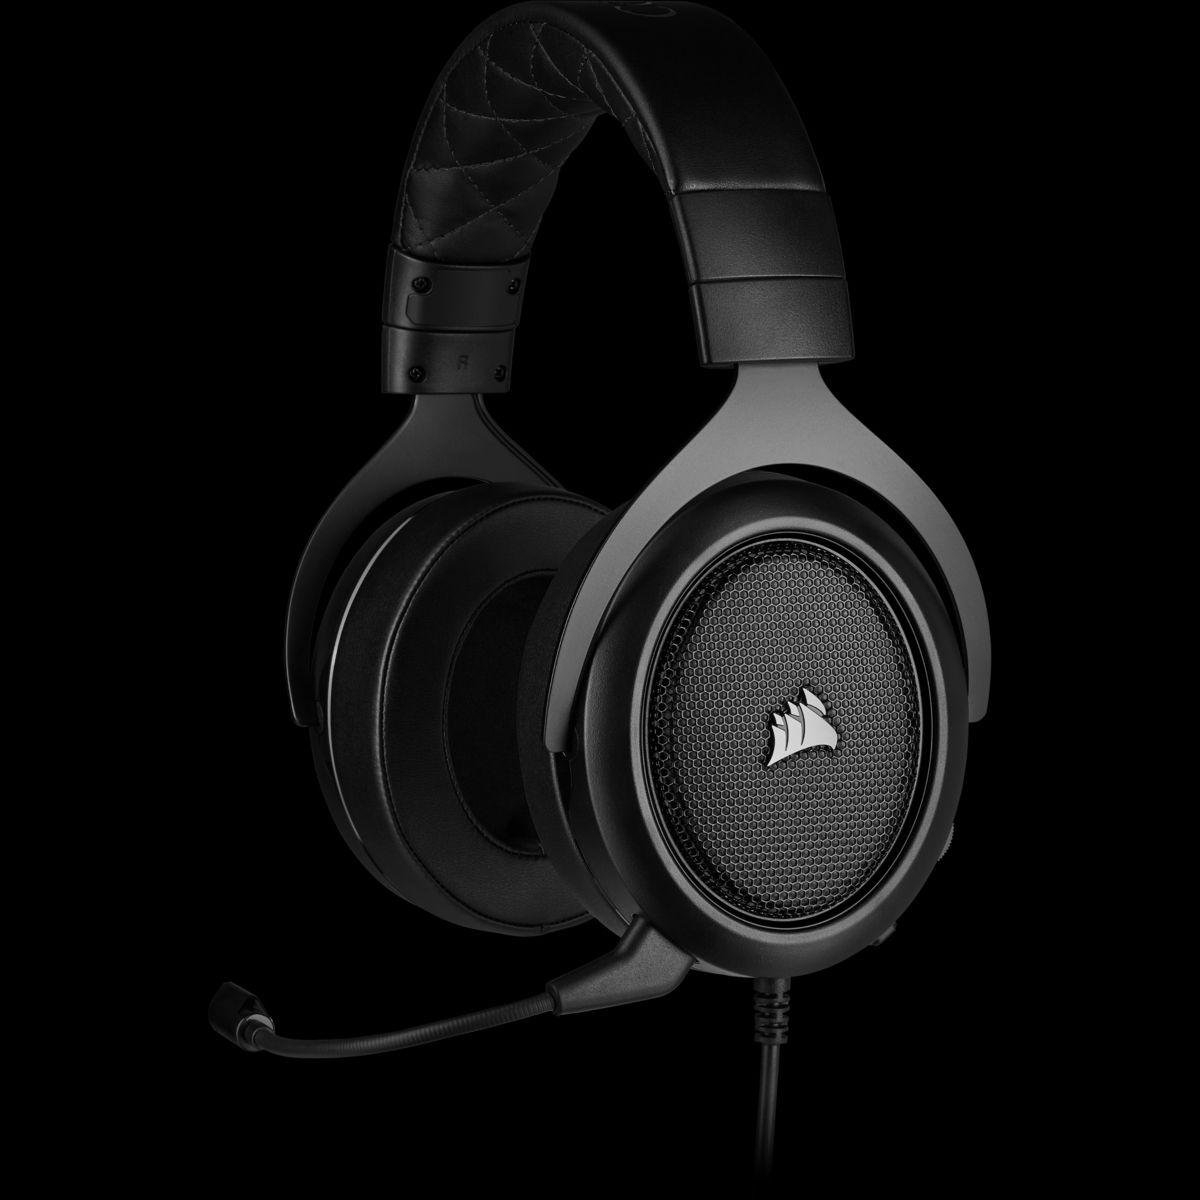 The 7 Best PC Gaming Headsets With Wires